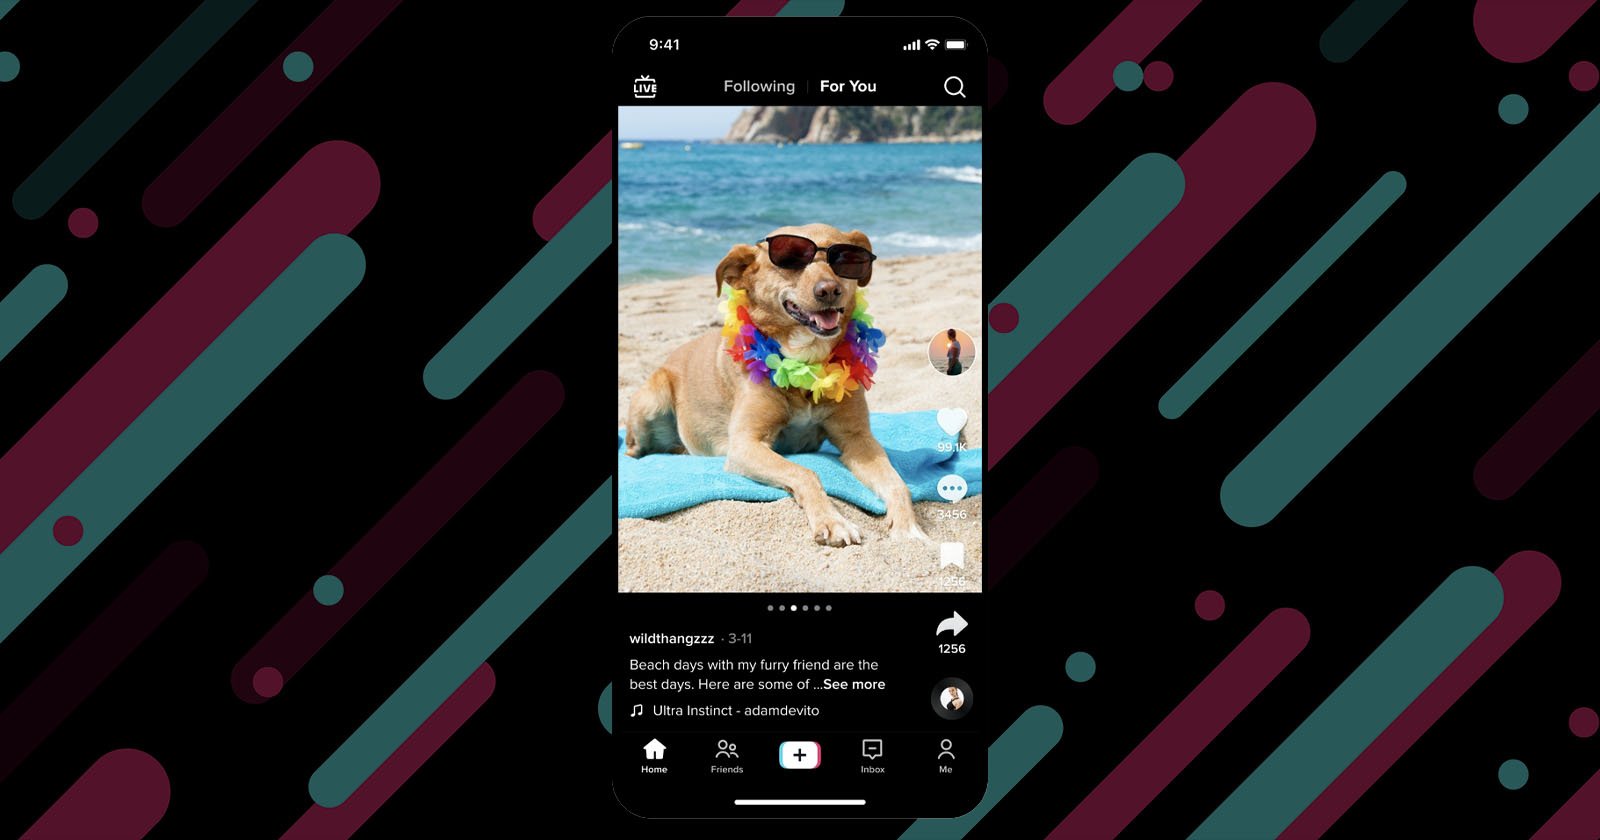 TikTok Adds Photo Sharing Mode, Directly Taking on Instagram